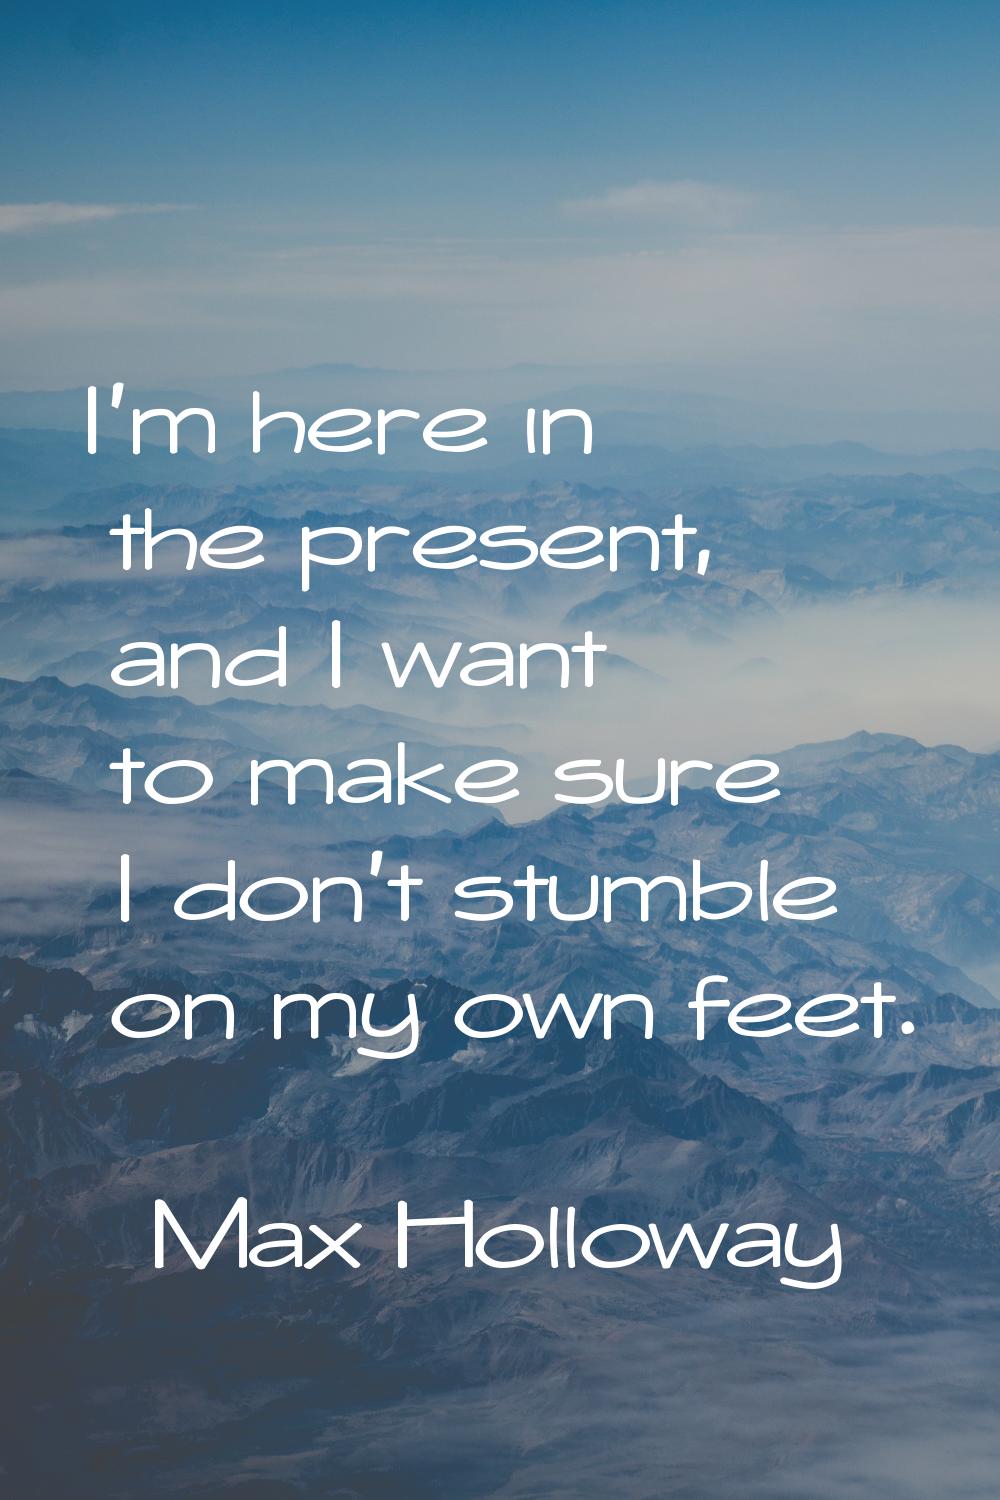 I'm here in the present, and I want to make sure I don't stumble on my own feet.